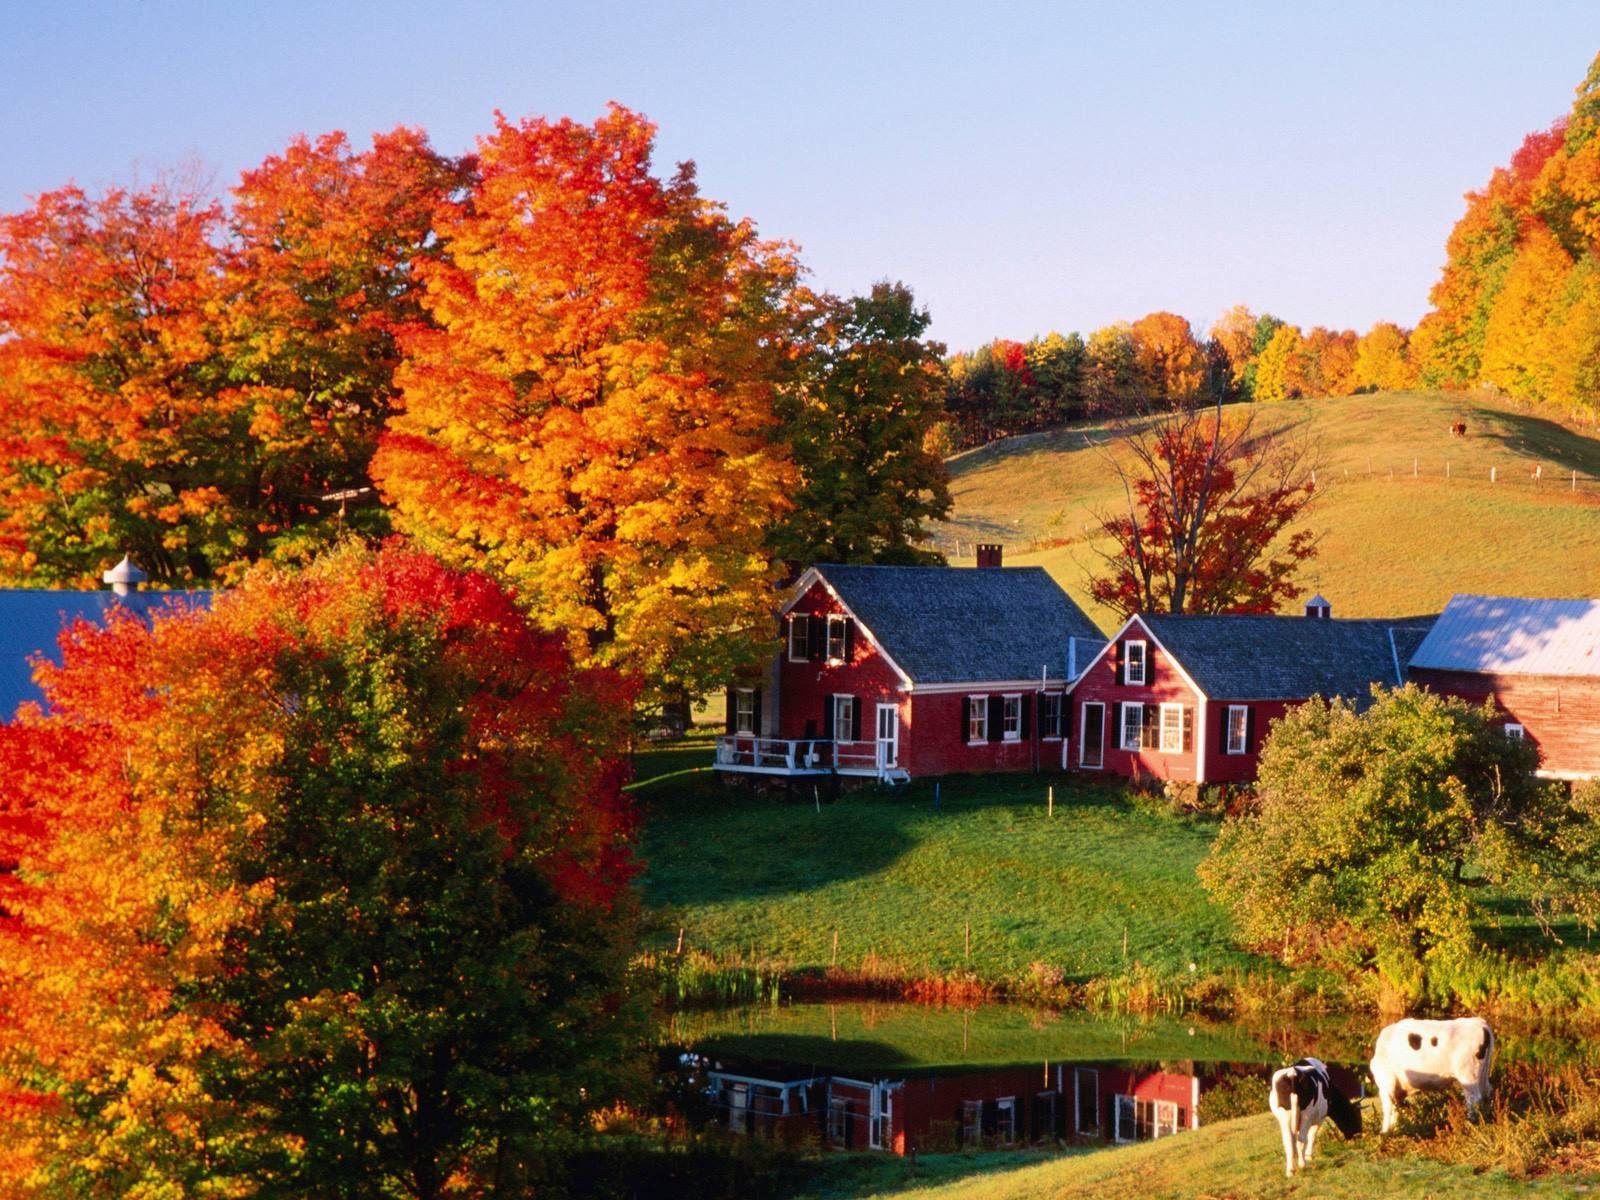 Autumn in Vermont, New England. Vermont farms, Barn photo, Country barns